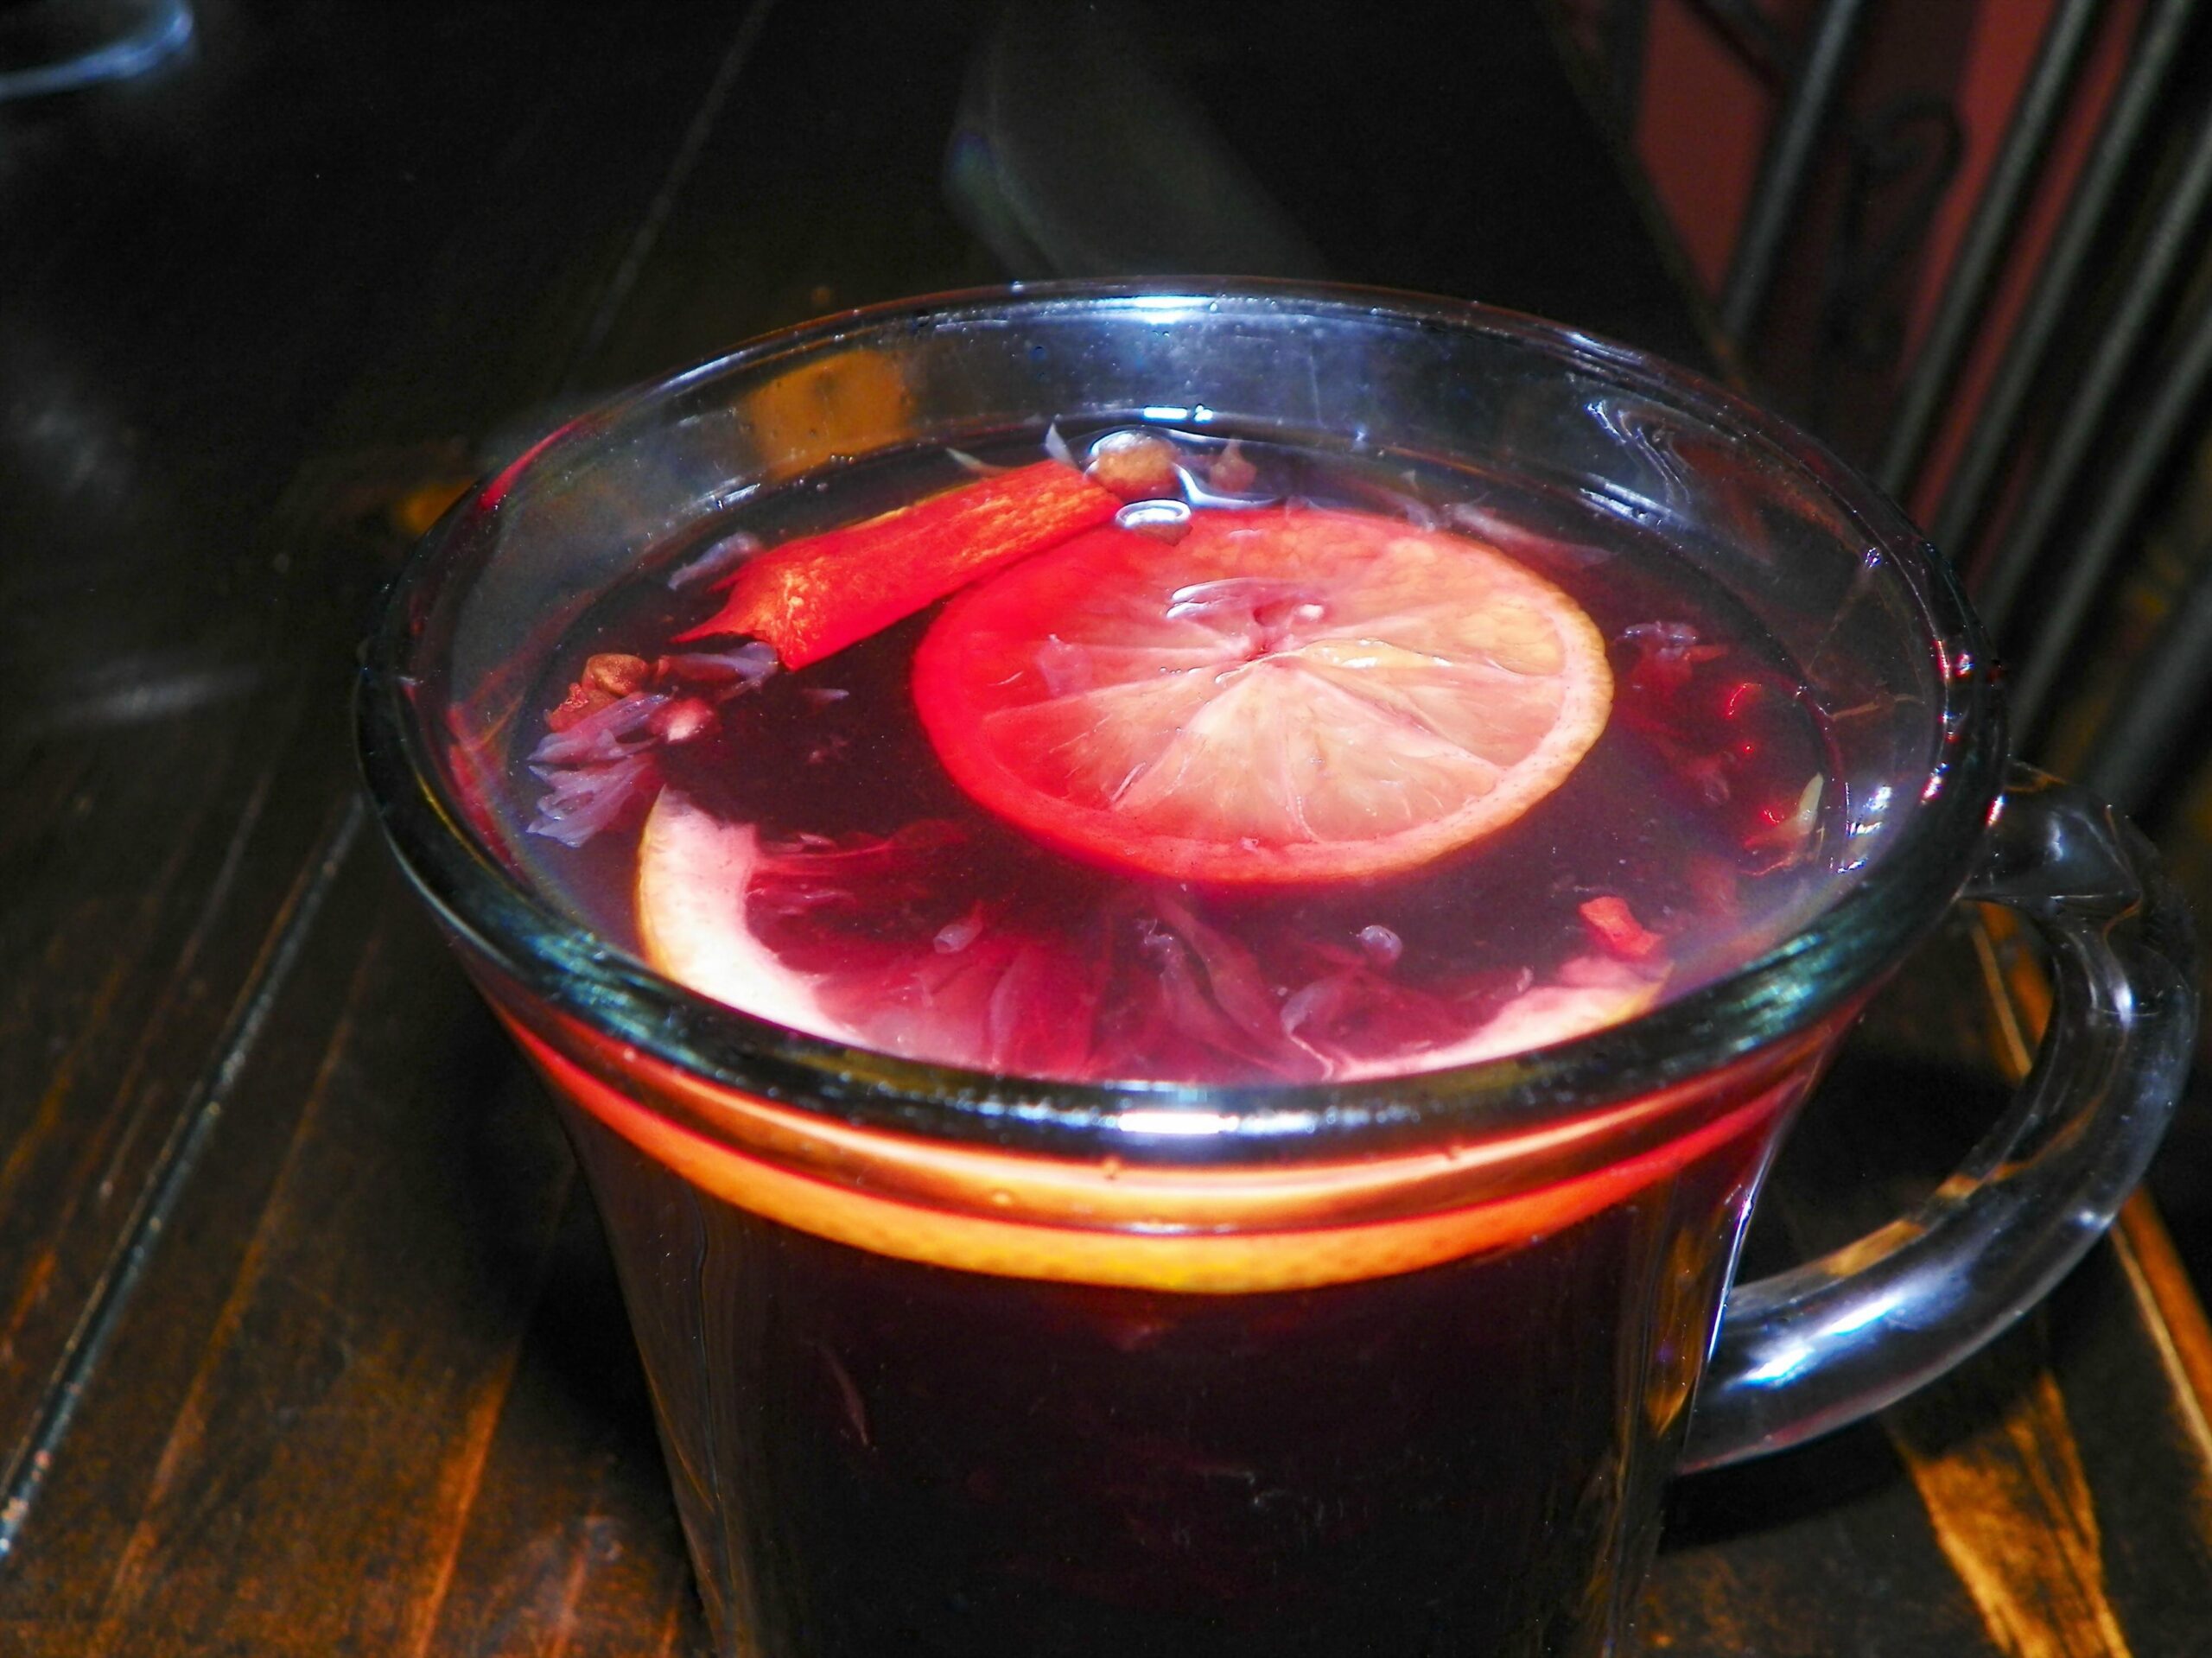  A cozy blend of red wine, spices, and orange slices - the perfect winter warmer.